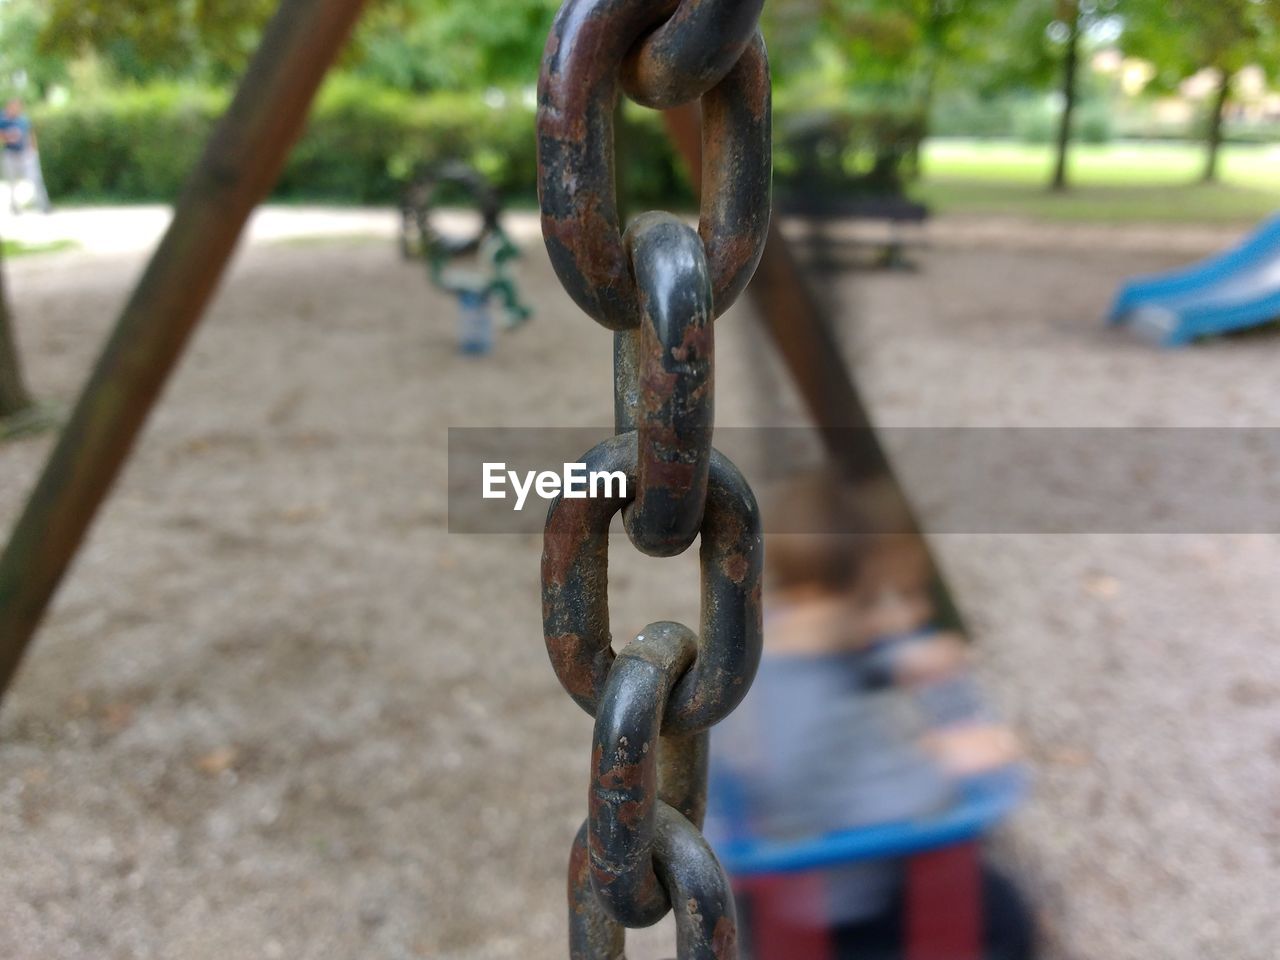 CLOSE-UP OF METAL CHAIN ON PLAYGROUND